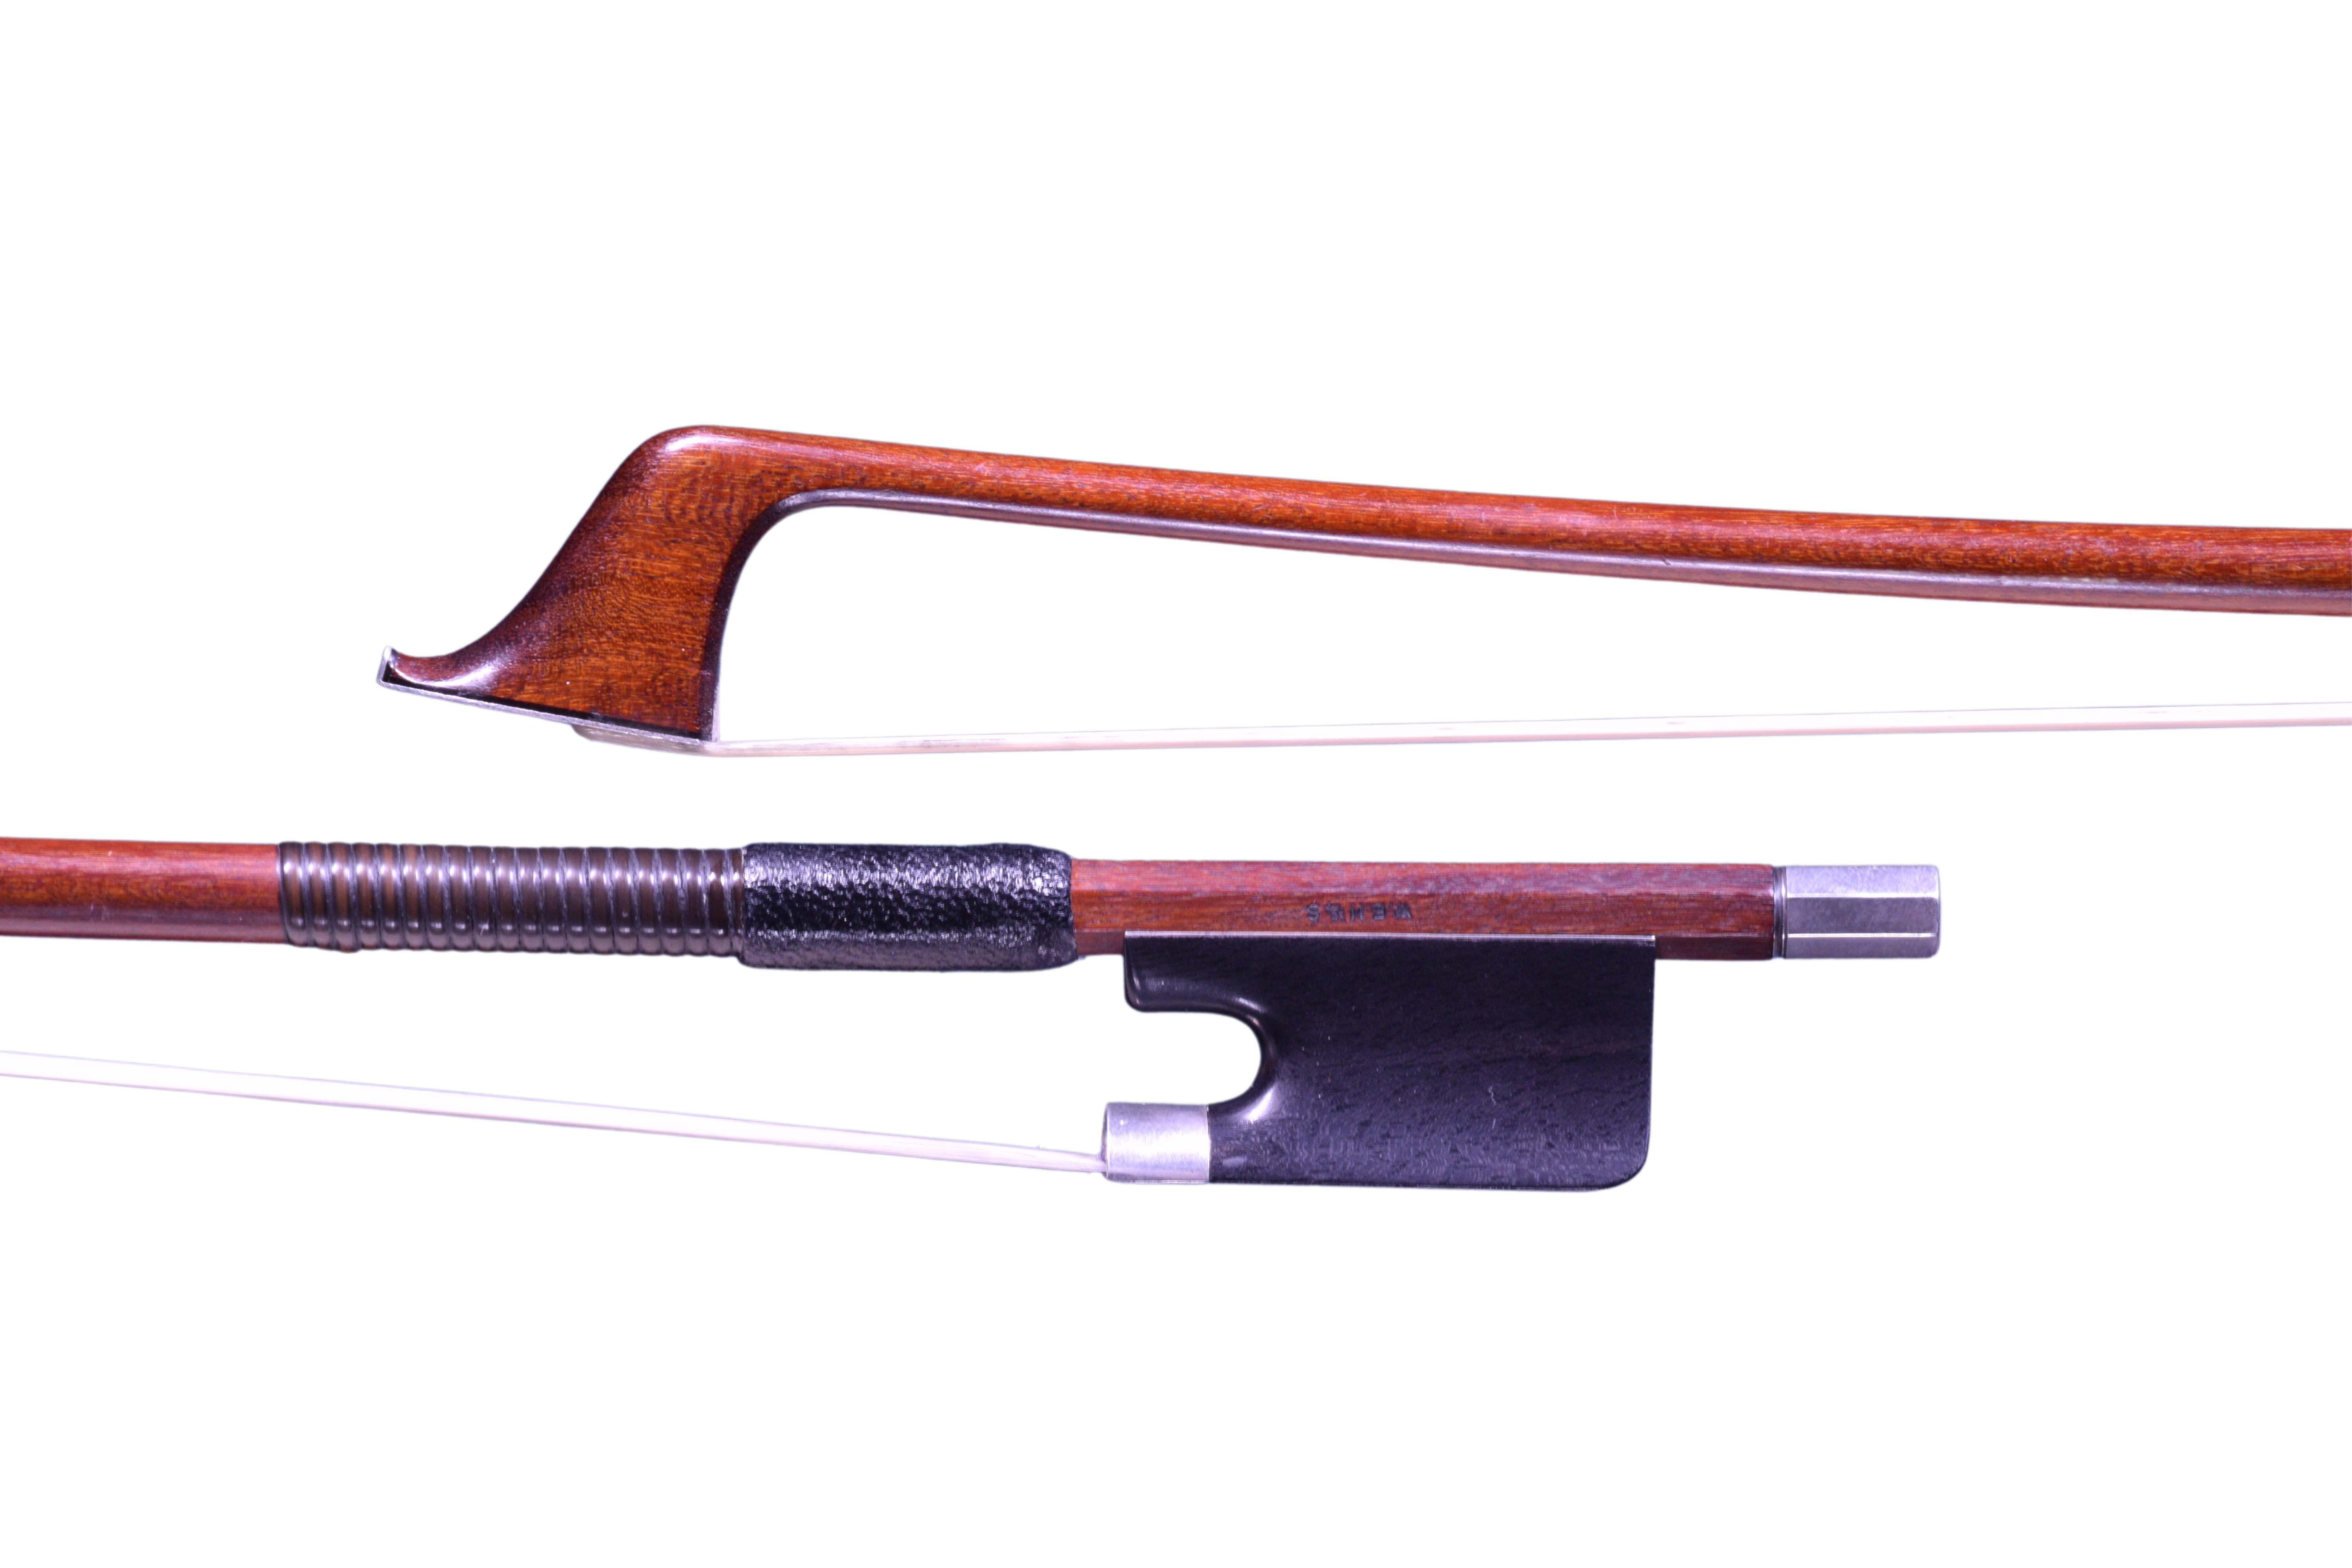 Hill cello bow frog and head